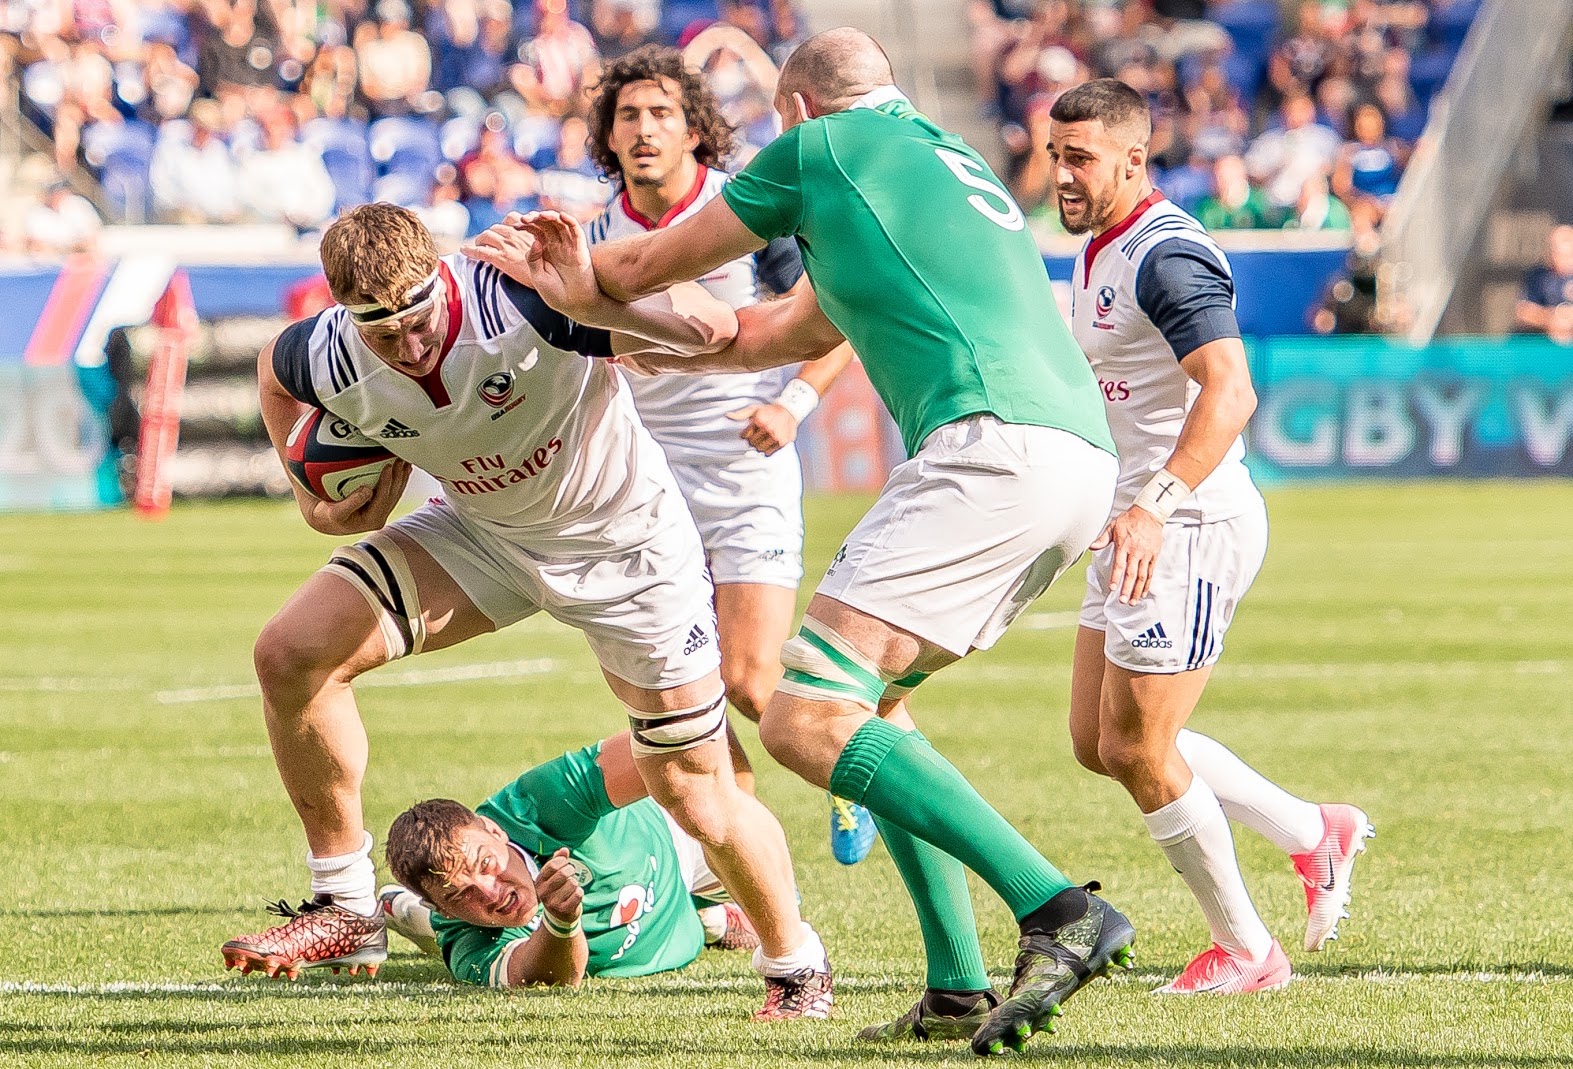 USA Rugby national team v Ireland June 10, 2017. Colleen McCloskey photo.